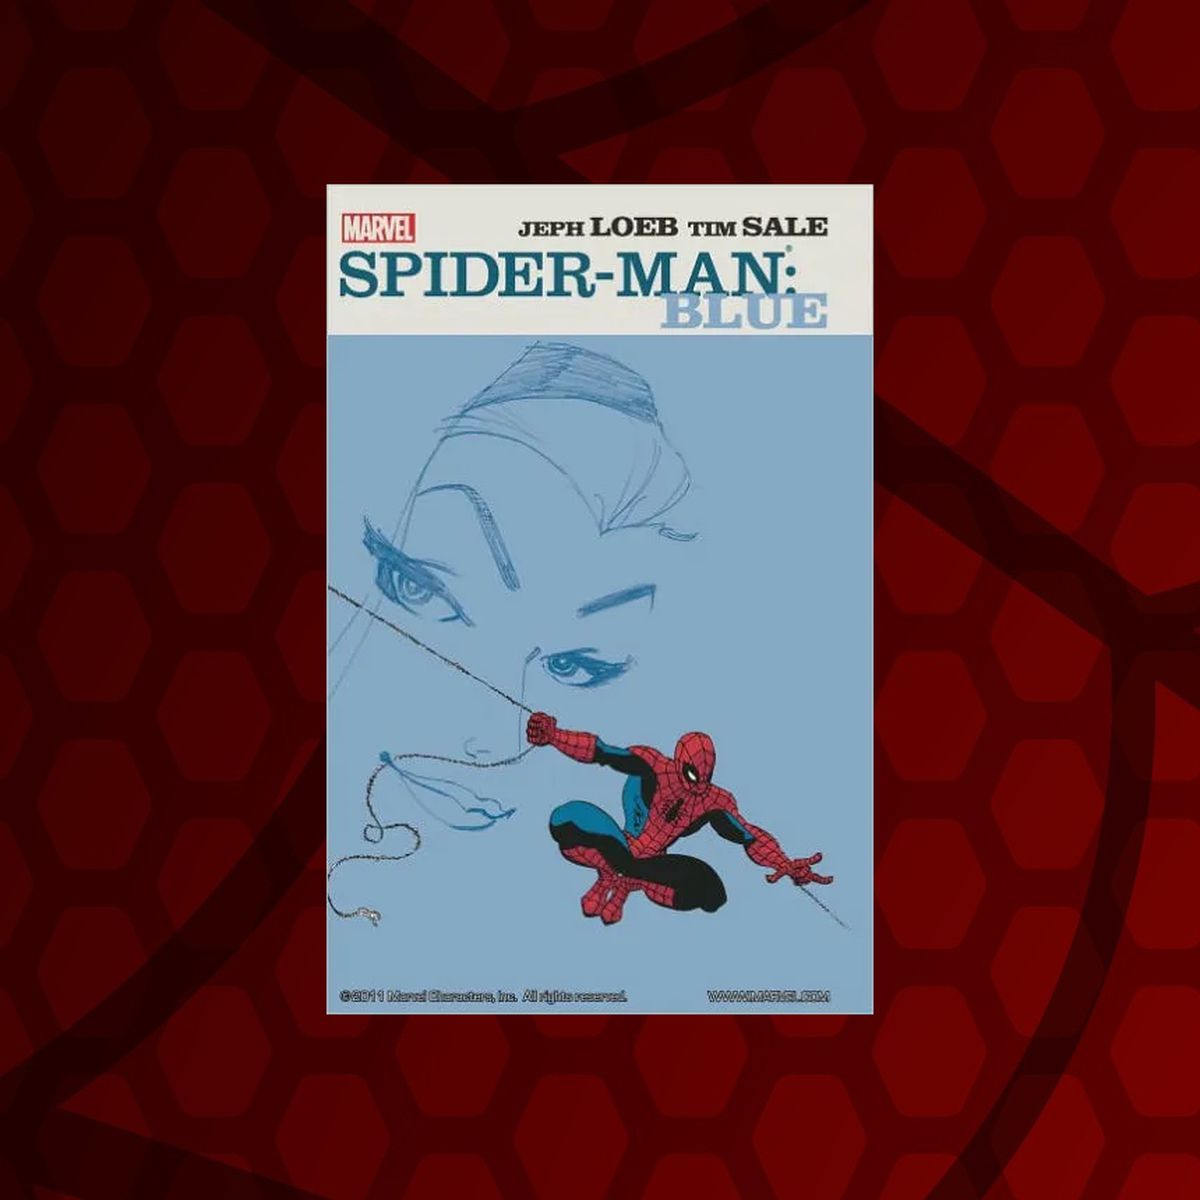 Can’t get enough Spider-Man? Join the club, and check out some of these great gifts